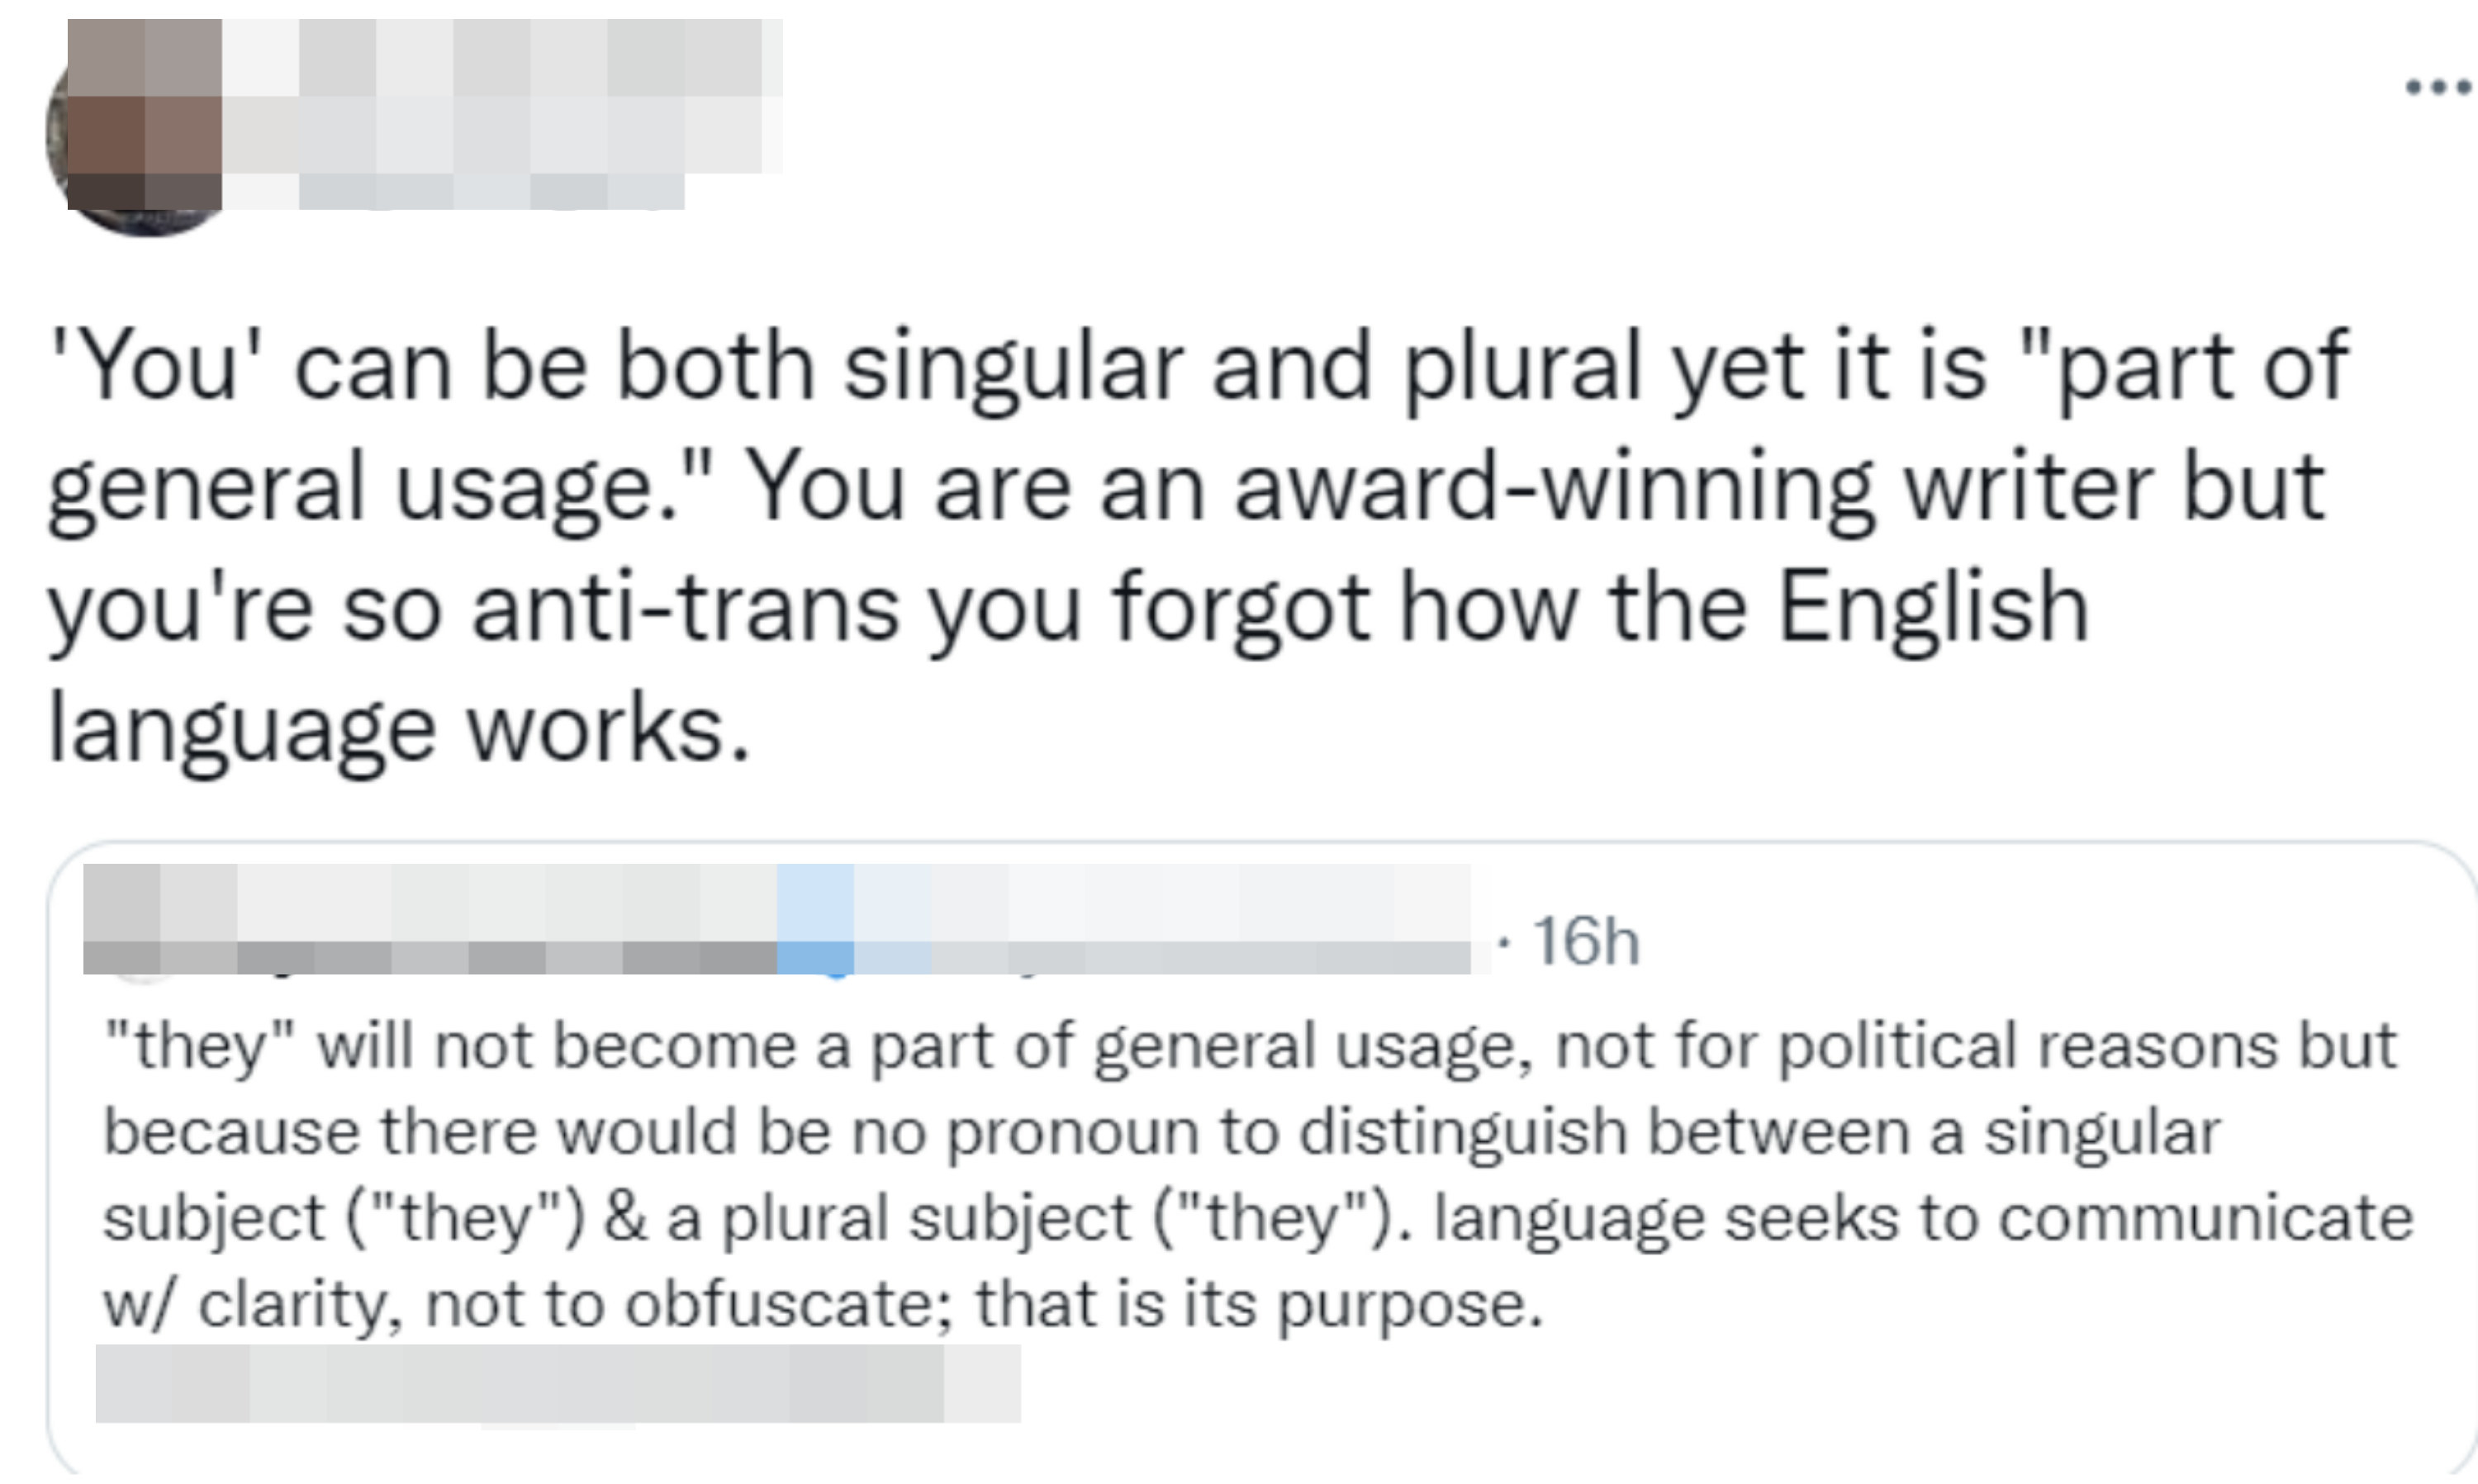 &quot;&#x27;You&#x27; can be both singular and plural yet...&quot;